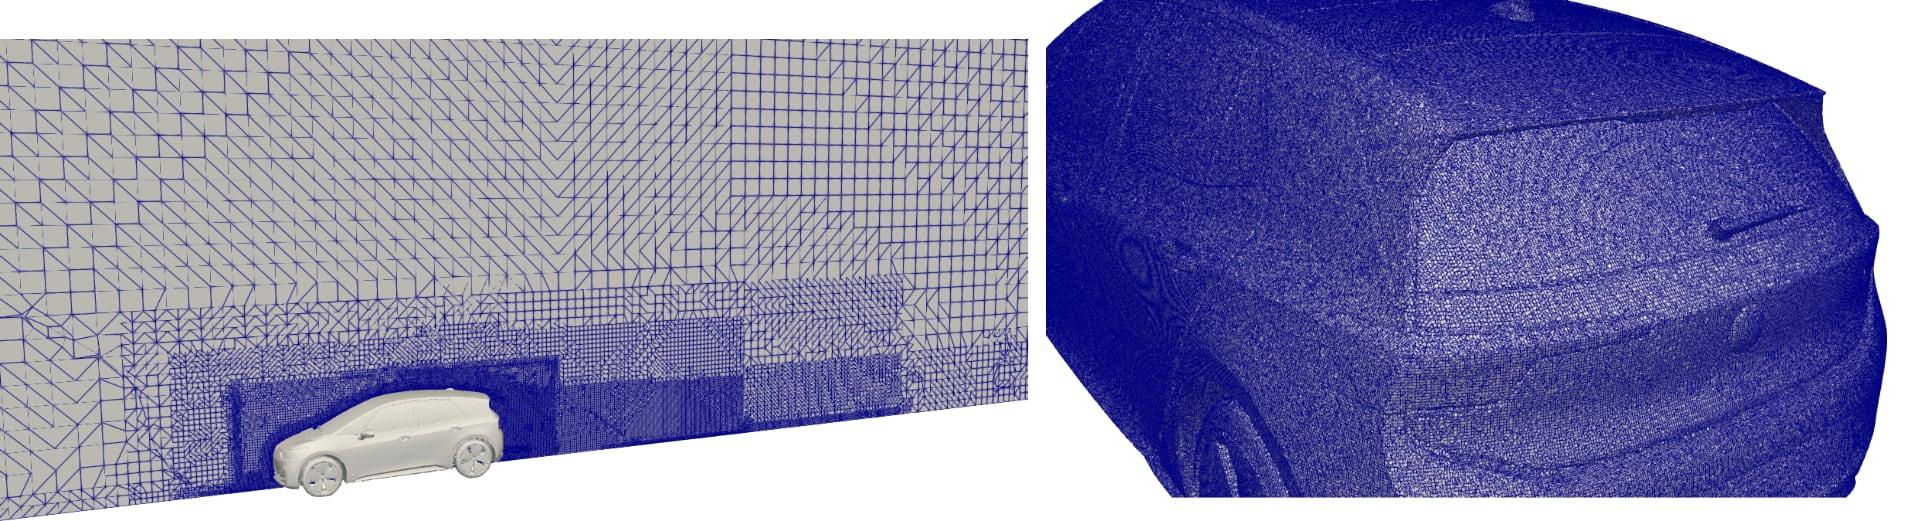 Figure 2: CFD mesh used for the flow solution and the optimization of the VW ID3 car. Left: a slice of the mesh passing through the middle of the car, right: detail of the surface mesh as seen from the port-back side of the car.